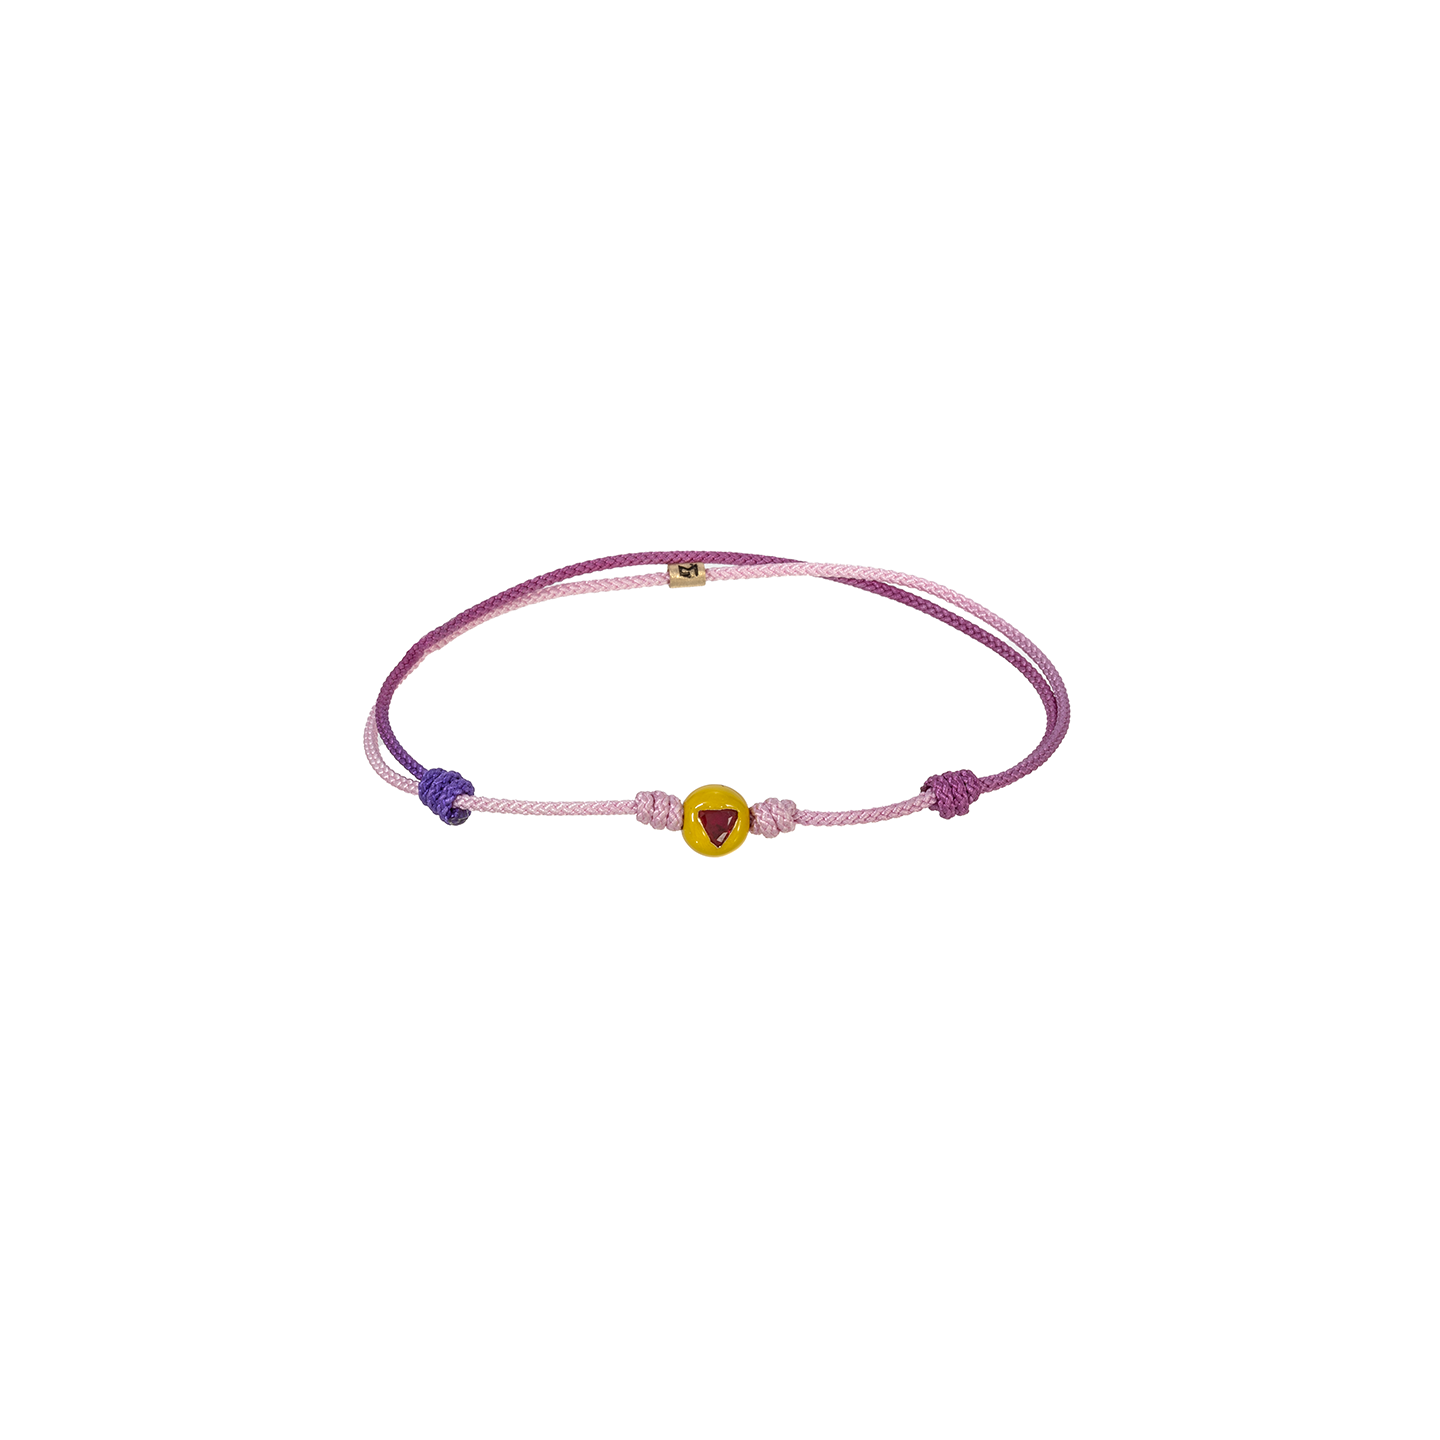 Luis Morais Large Gold Yellow Enameled Ball Bead with Ruby Trillion On Purple Ombre Cord Bracelet